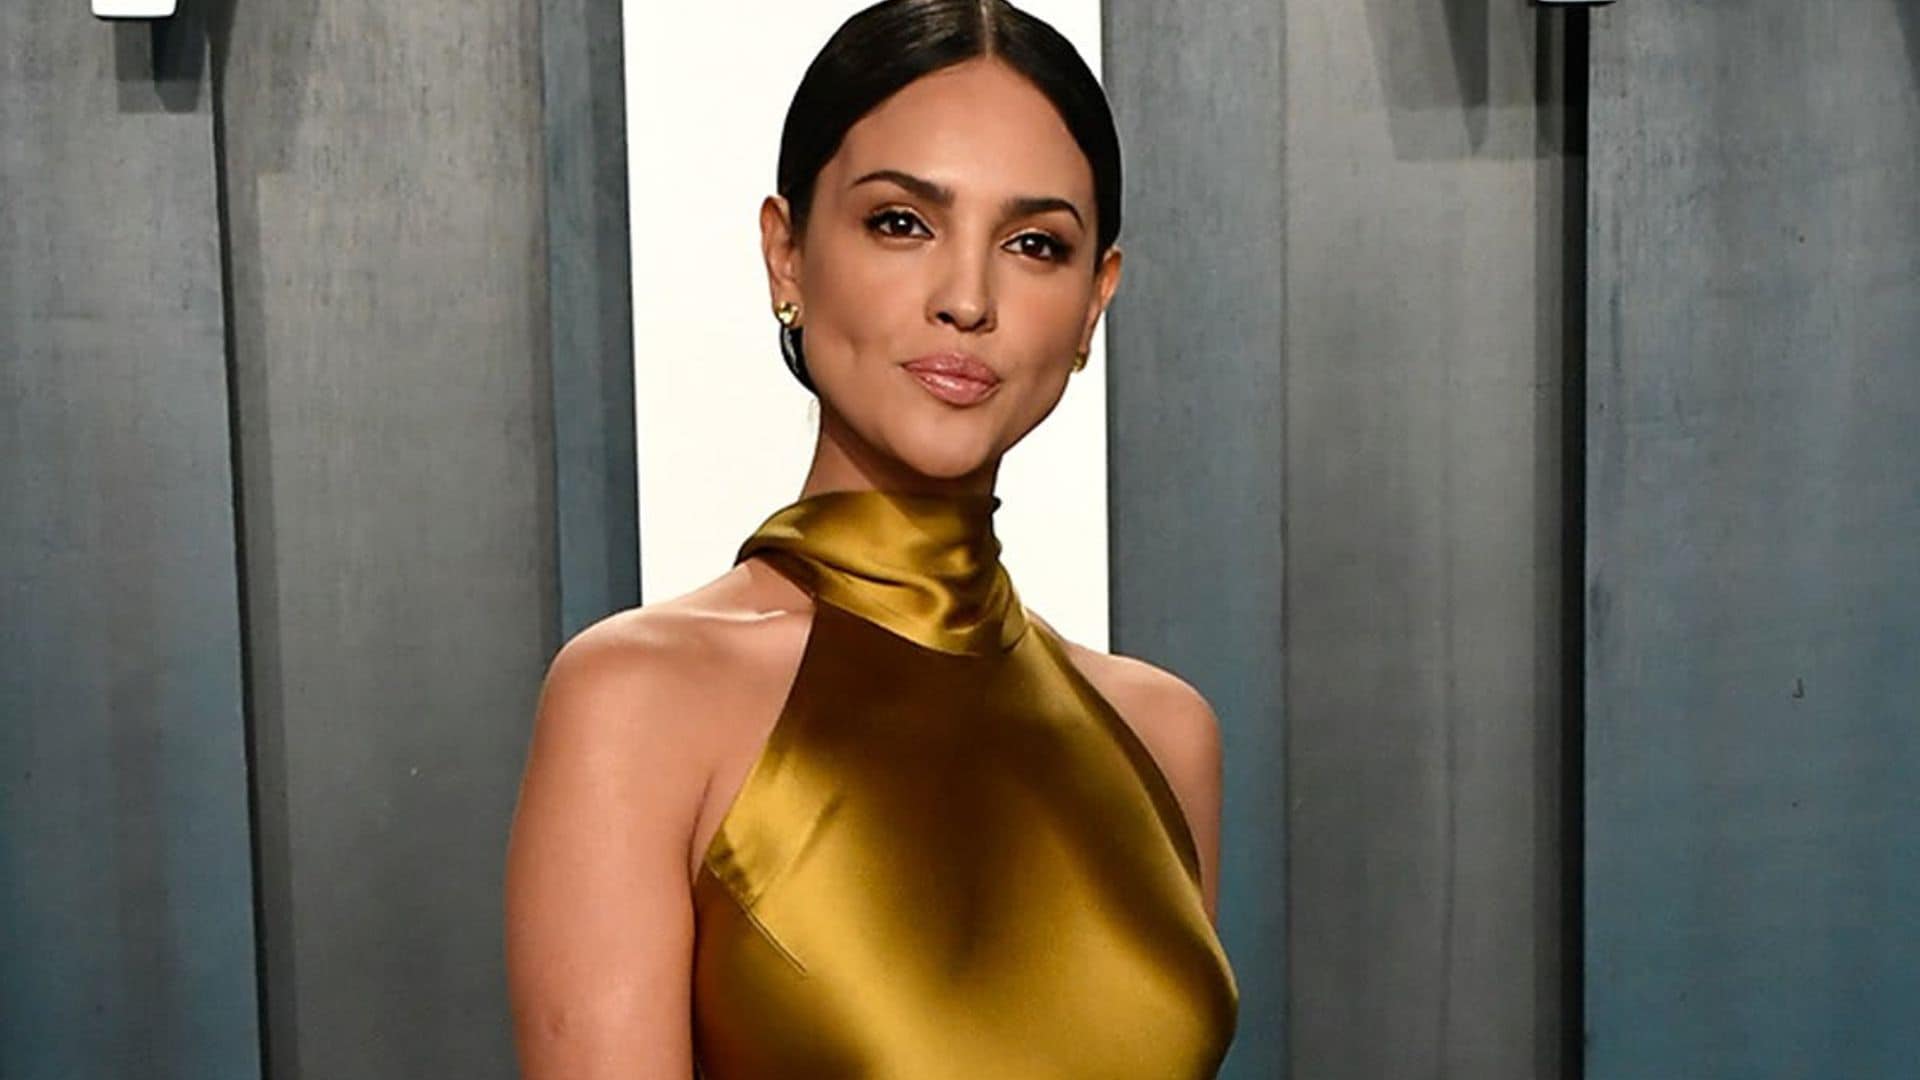 Eiza Gonzalez made her mother a promise in a letter from the past